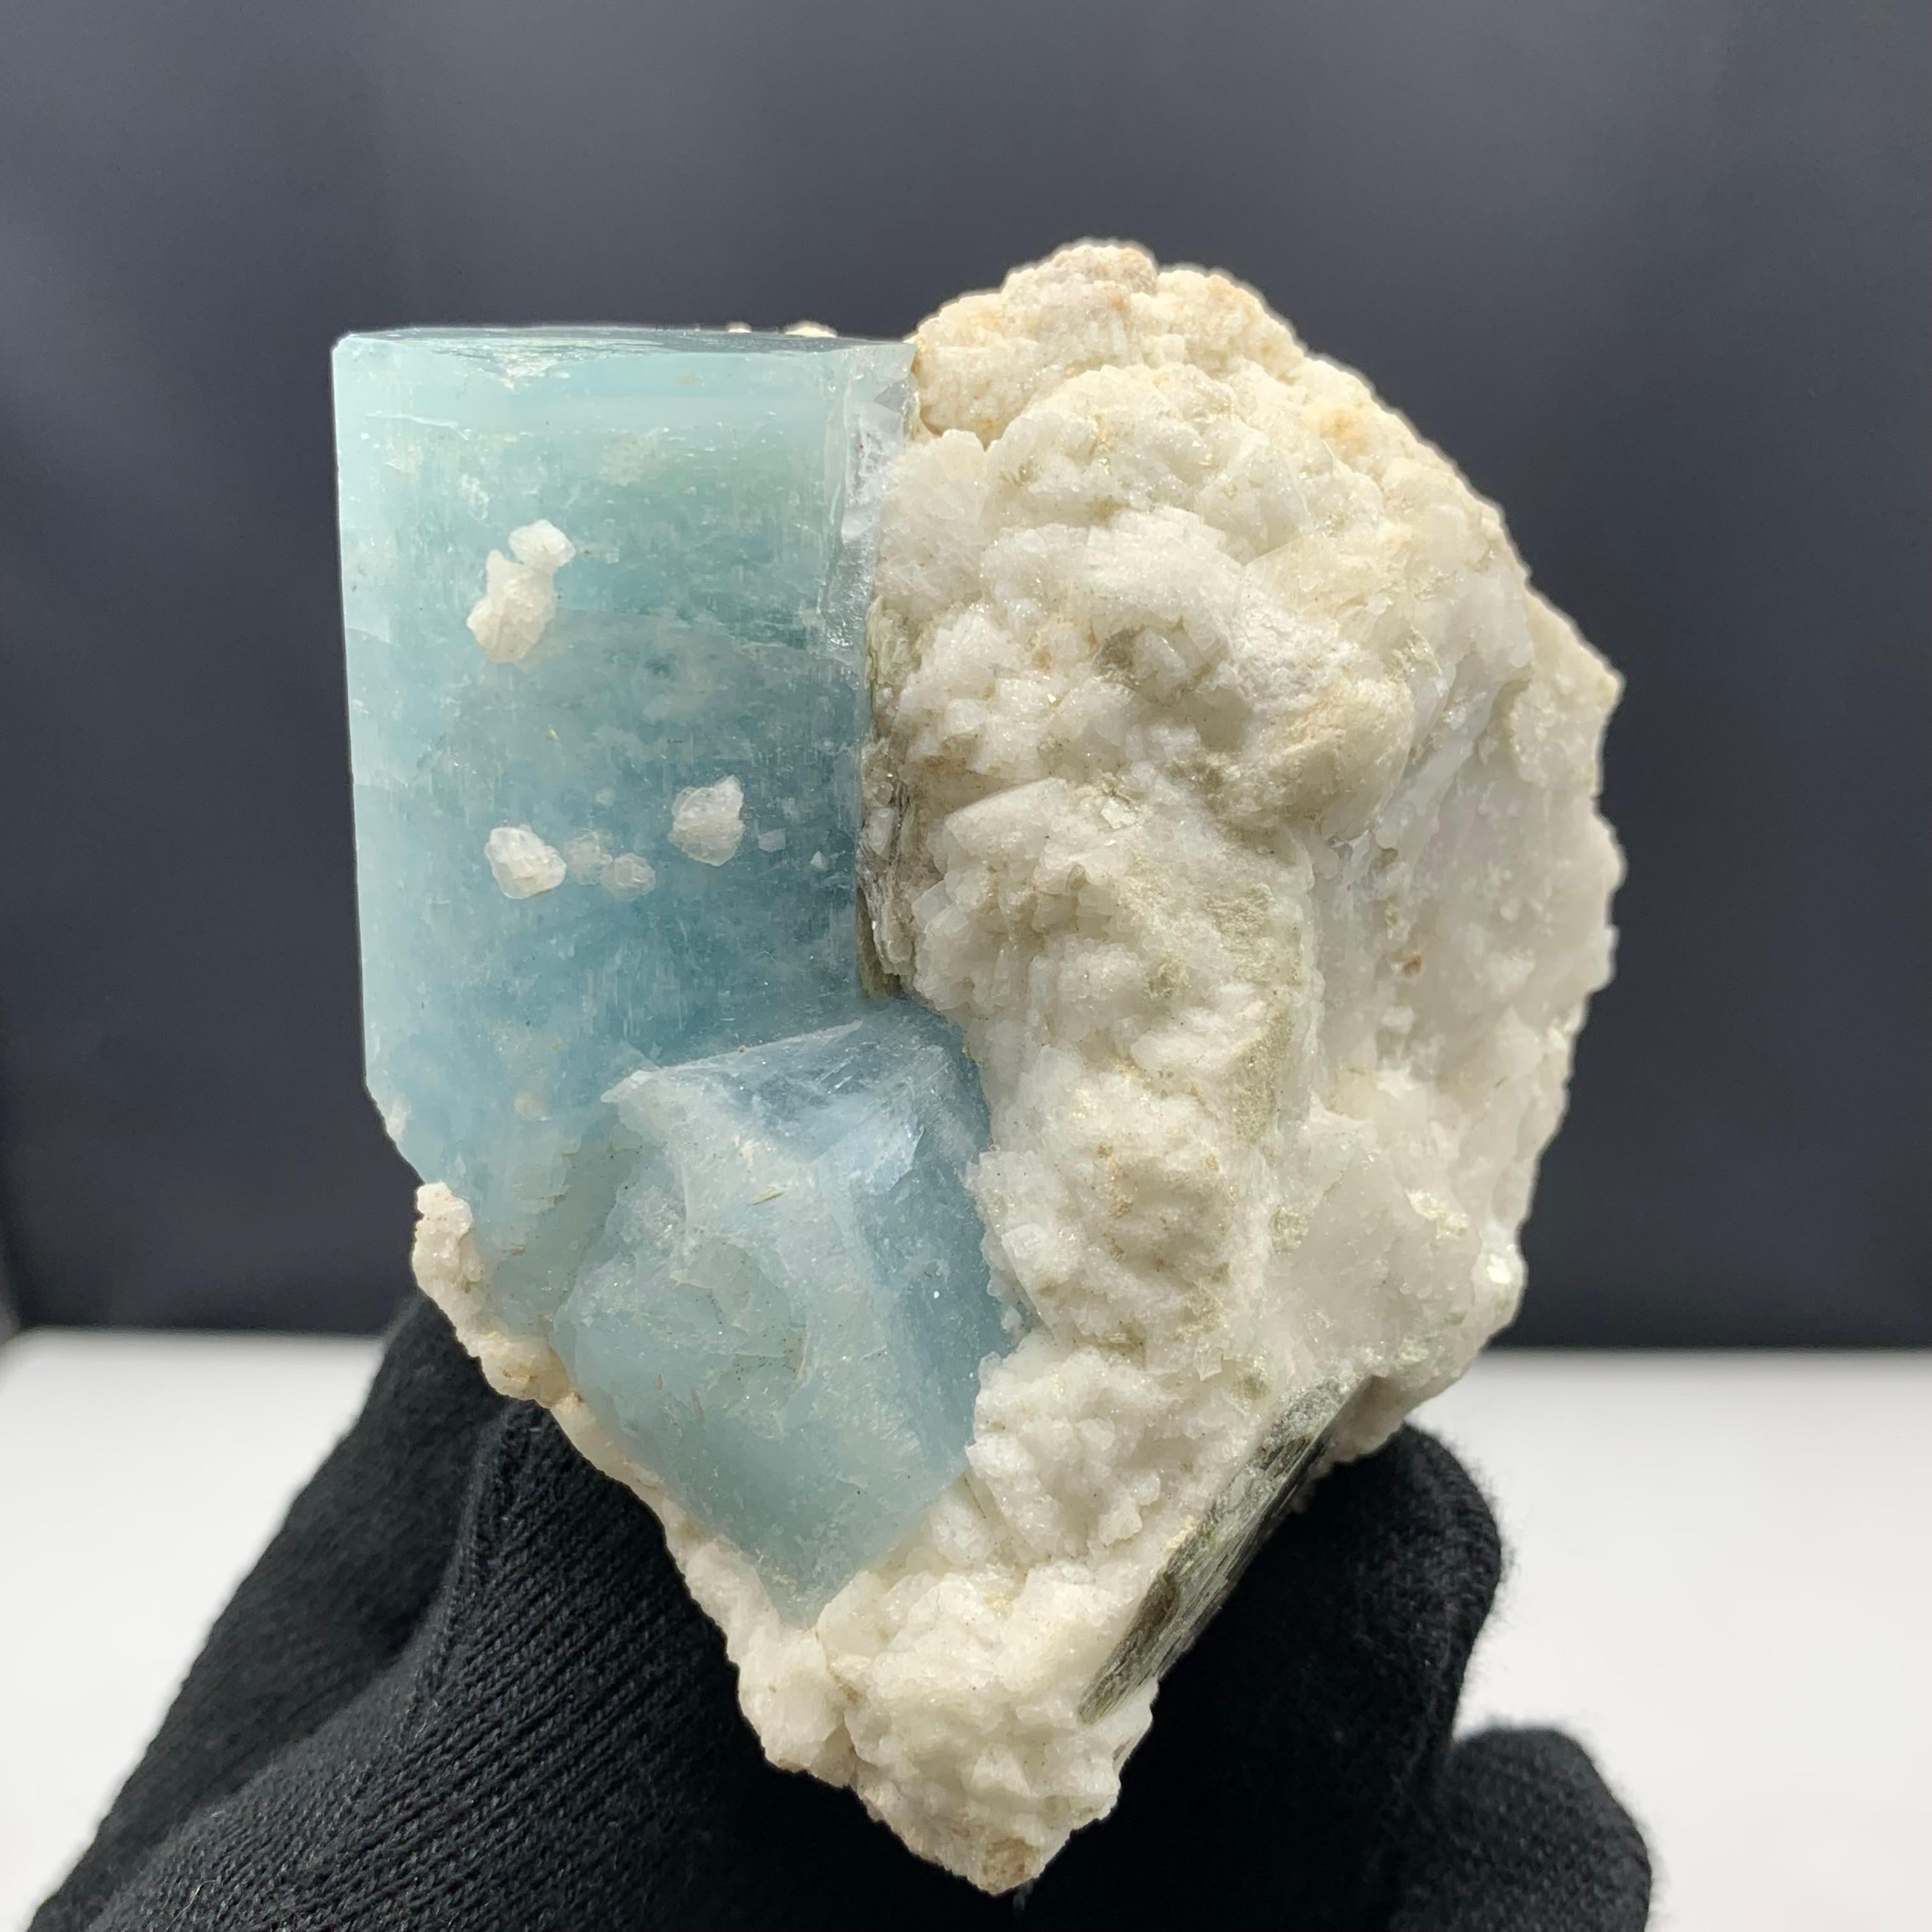 207. 16 Gram Gorgeous Aquamarine Specimen From Skardu District, Pakistan 

Weight: 207. 16 Gram 
Dimension: 7.8 x 6.9 x 3.3 Cm
Origin: Skardu District, Pakistan 

Aquamarine is a pale-blue to light-green variety of beryl. The color of aquamarine can